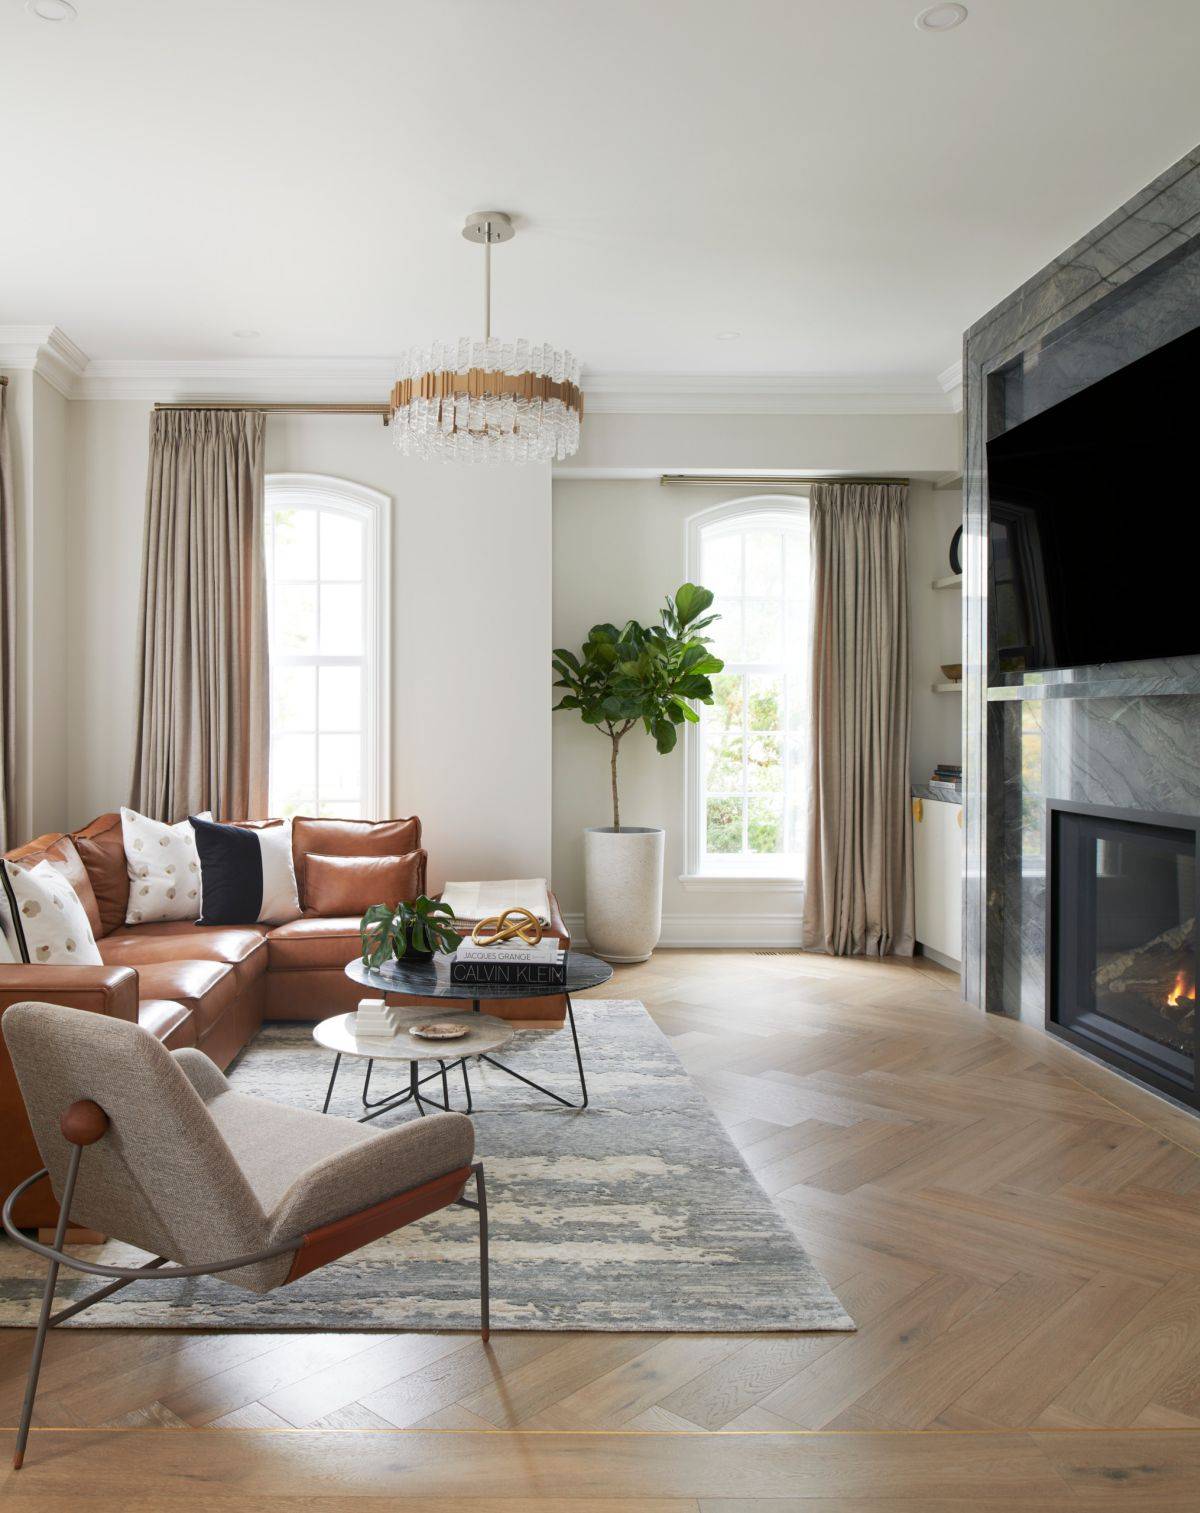 Fireplace is the focal point of this contemporary family room